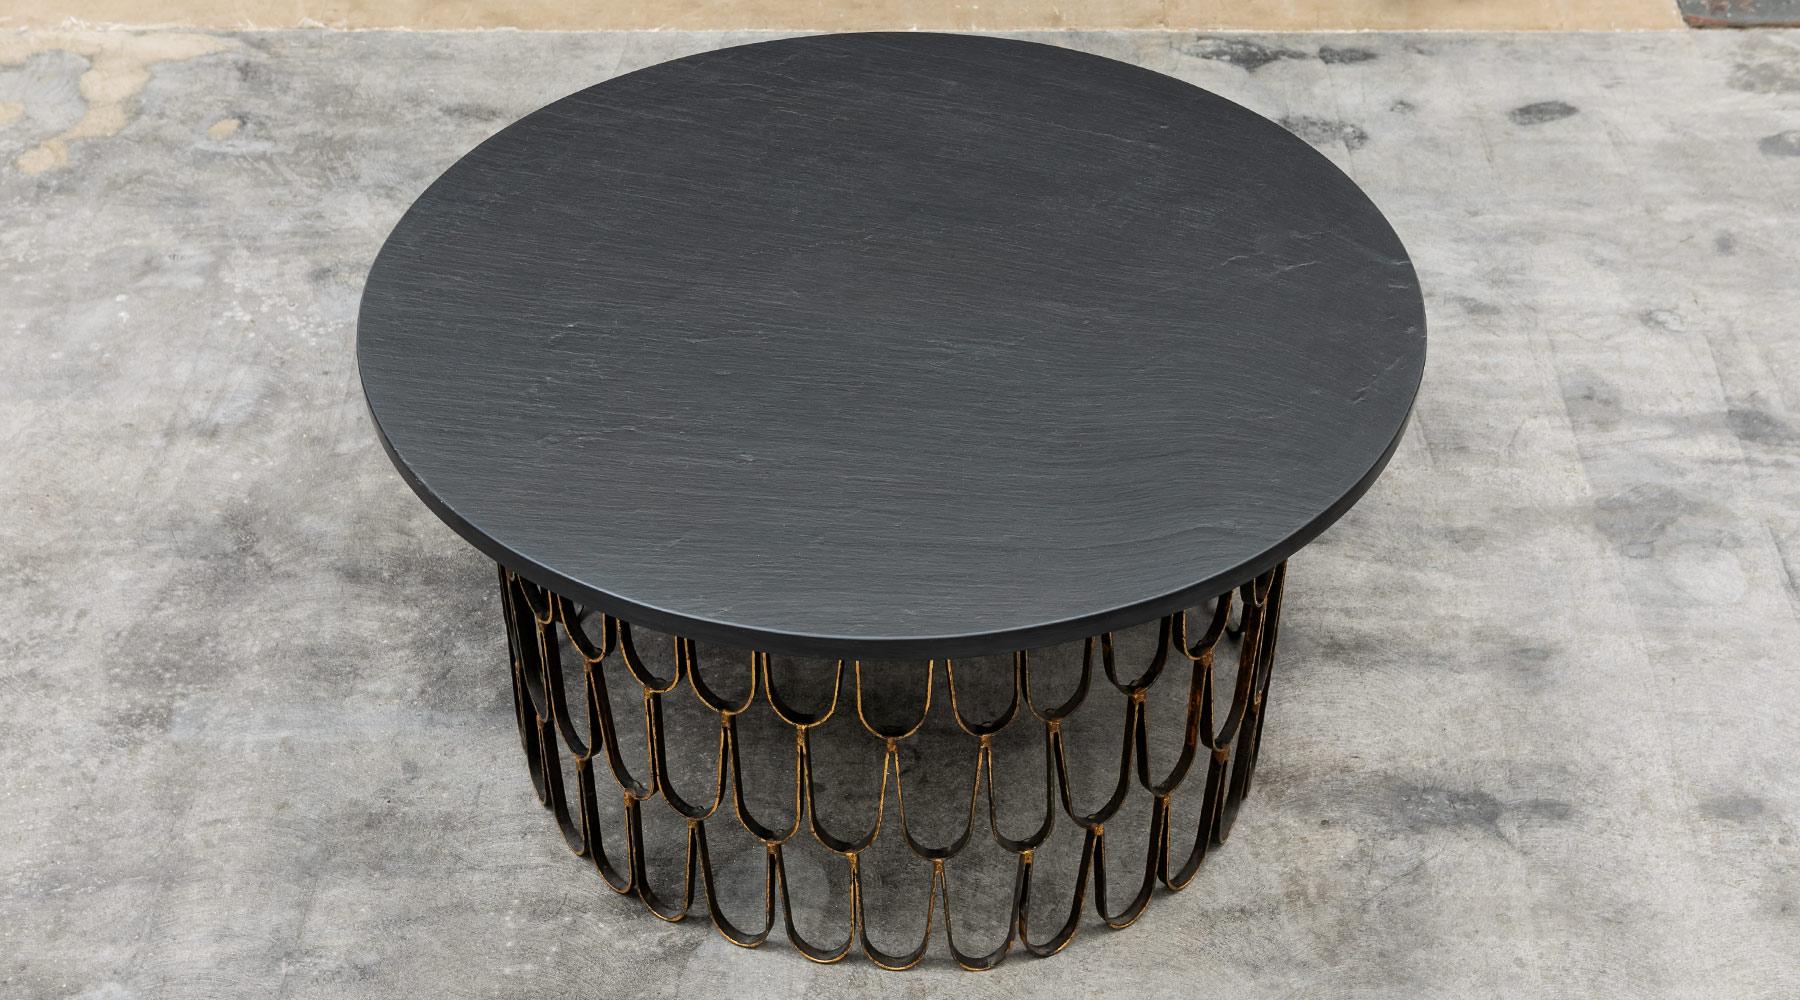 Coffee table, gilt and enameled steel, slate, giltwood, by Paul Evans and Phillip Lloyd Powell, USA, 1960.

A wonderful, unique piece, finished with three different materials: gilded and enamelled steel, slate, gilded wood. Manufactured by Paul